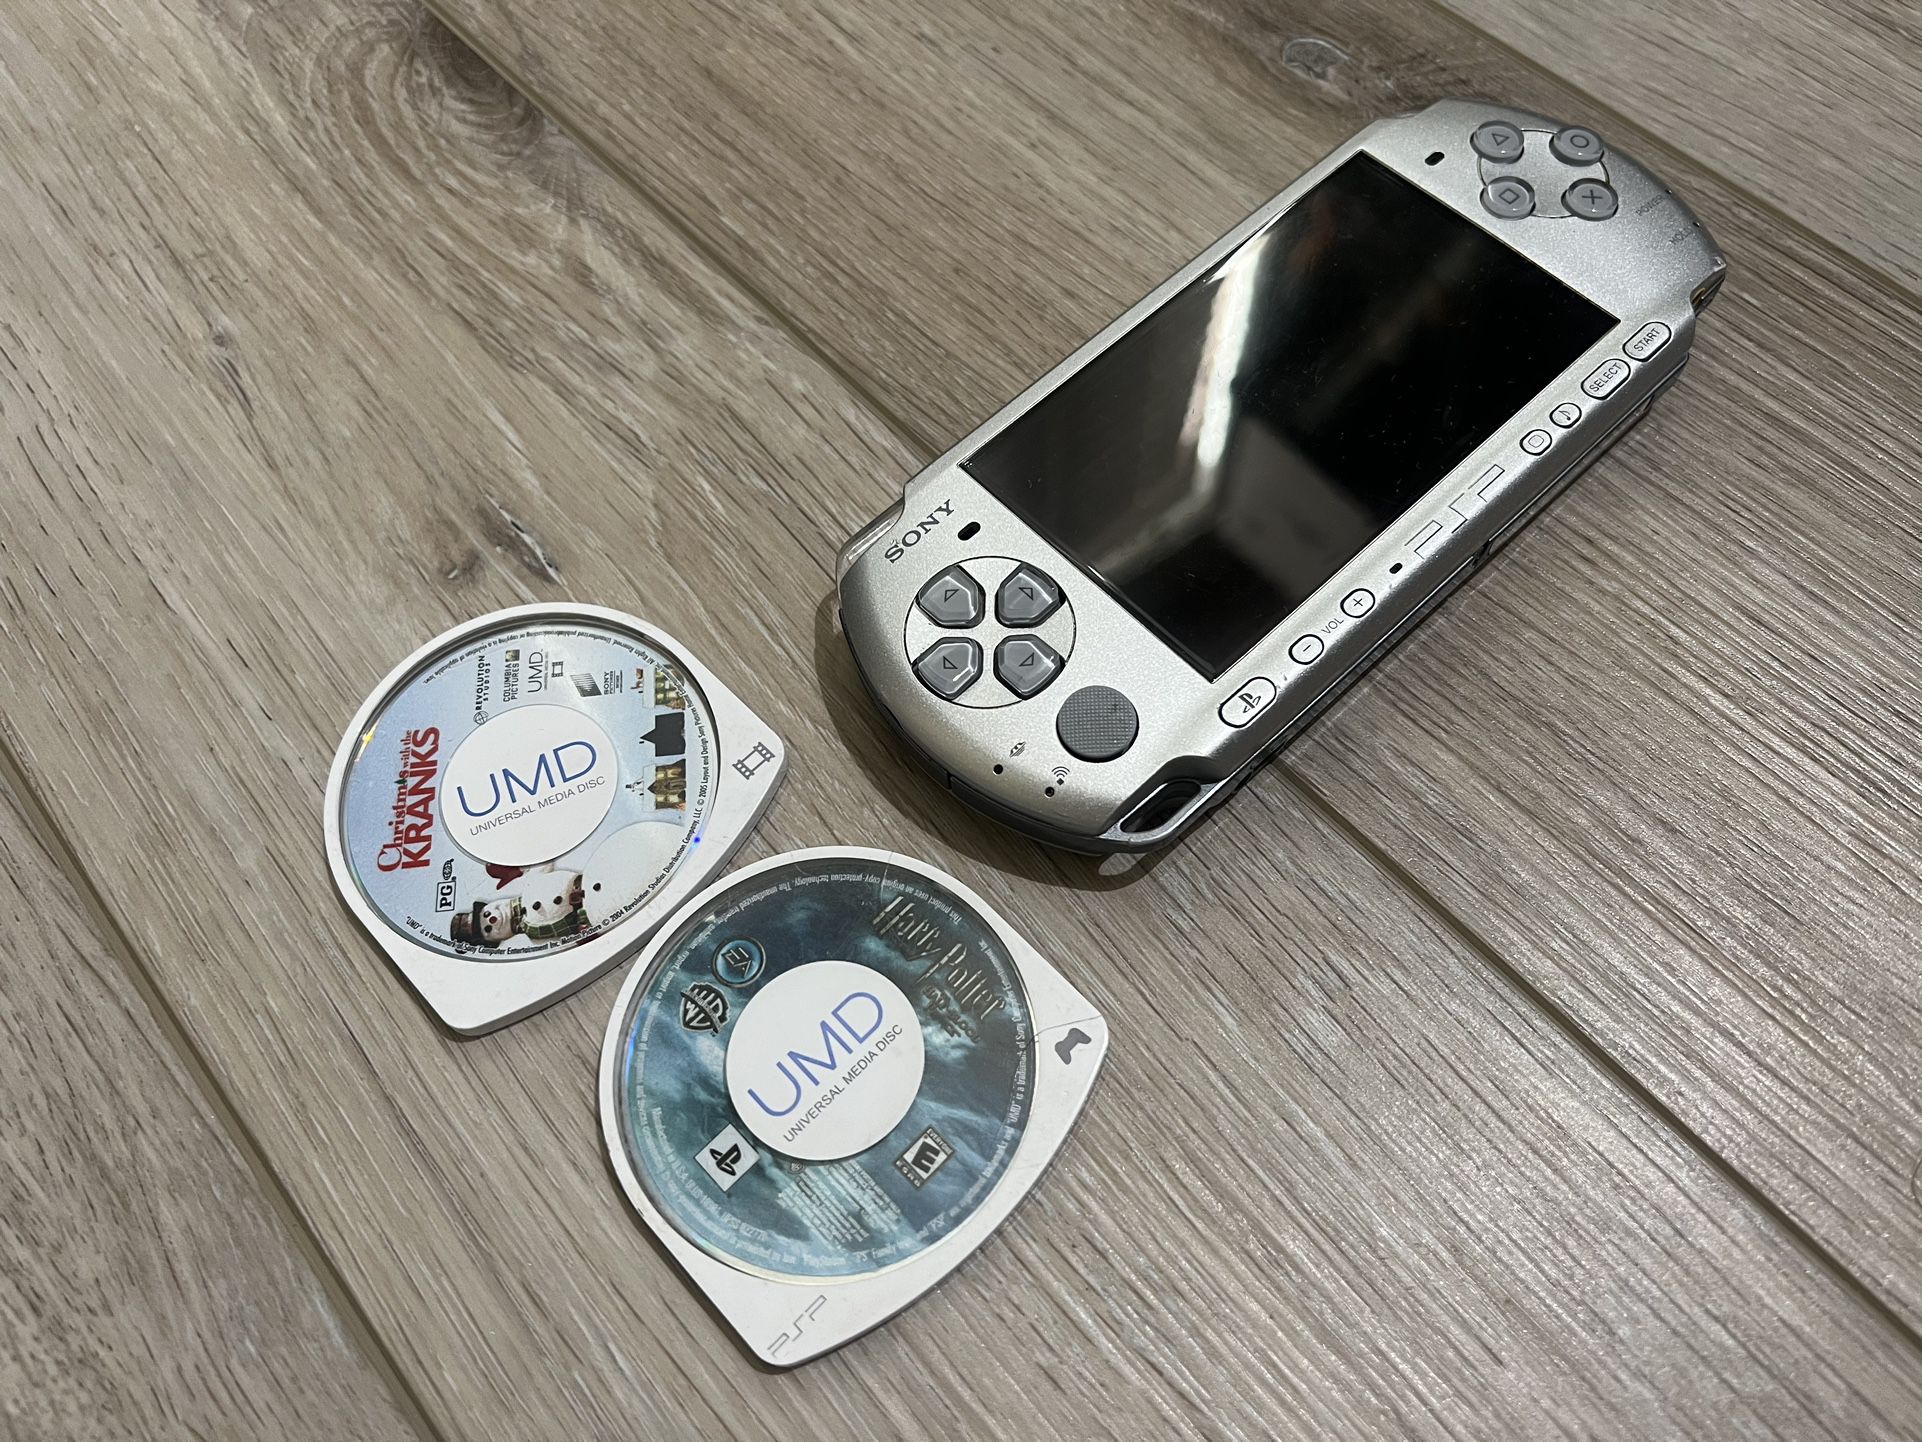 Sony Playstation Portable PSP 3000 Series 